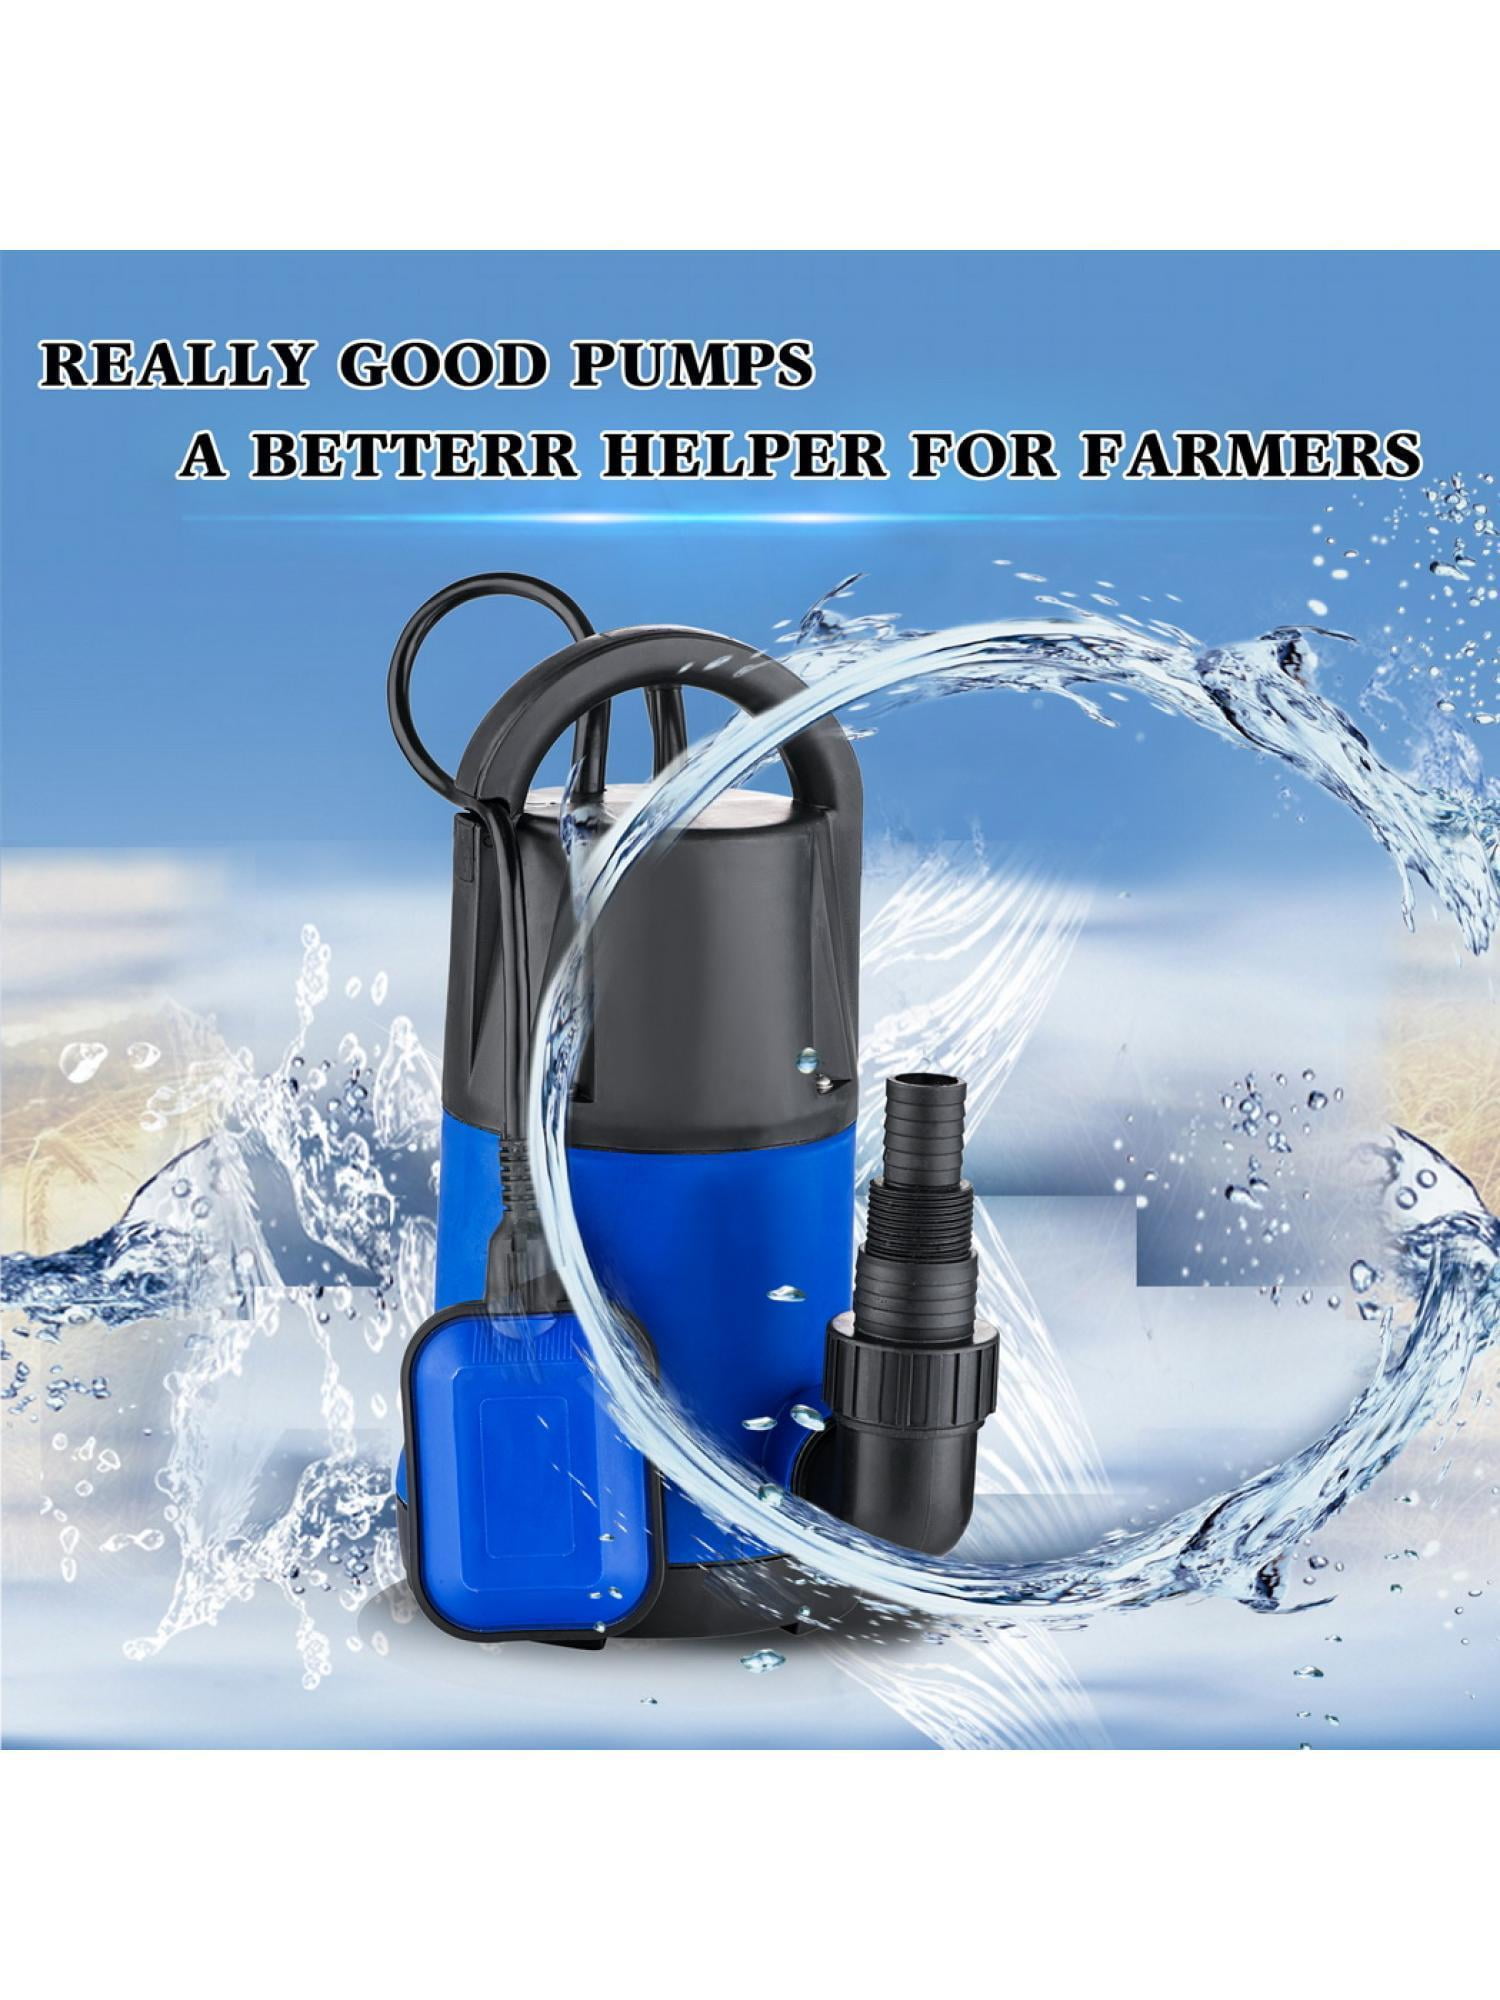 Pond Aquarium Garden Blue Hicient Submersible Sump Pump 3400GPH 1100W Clean Dirty Water Flood Drain Pump with Automatic ON/OFF for Pool